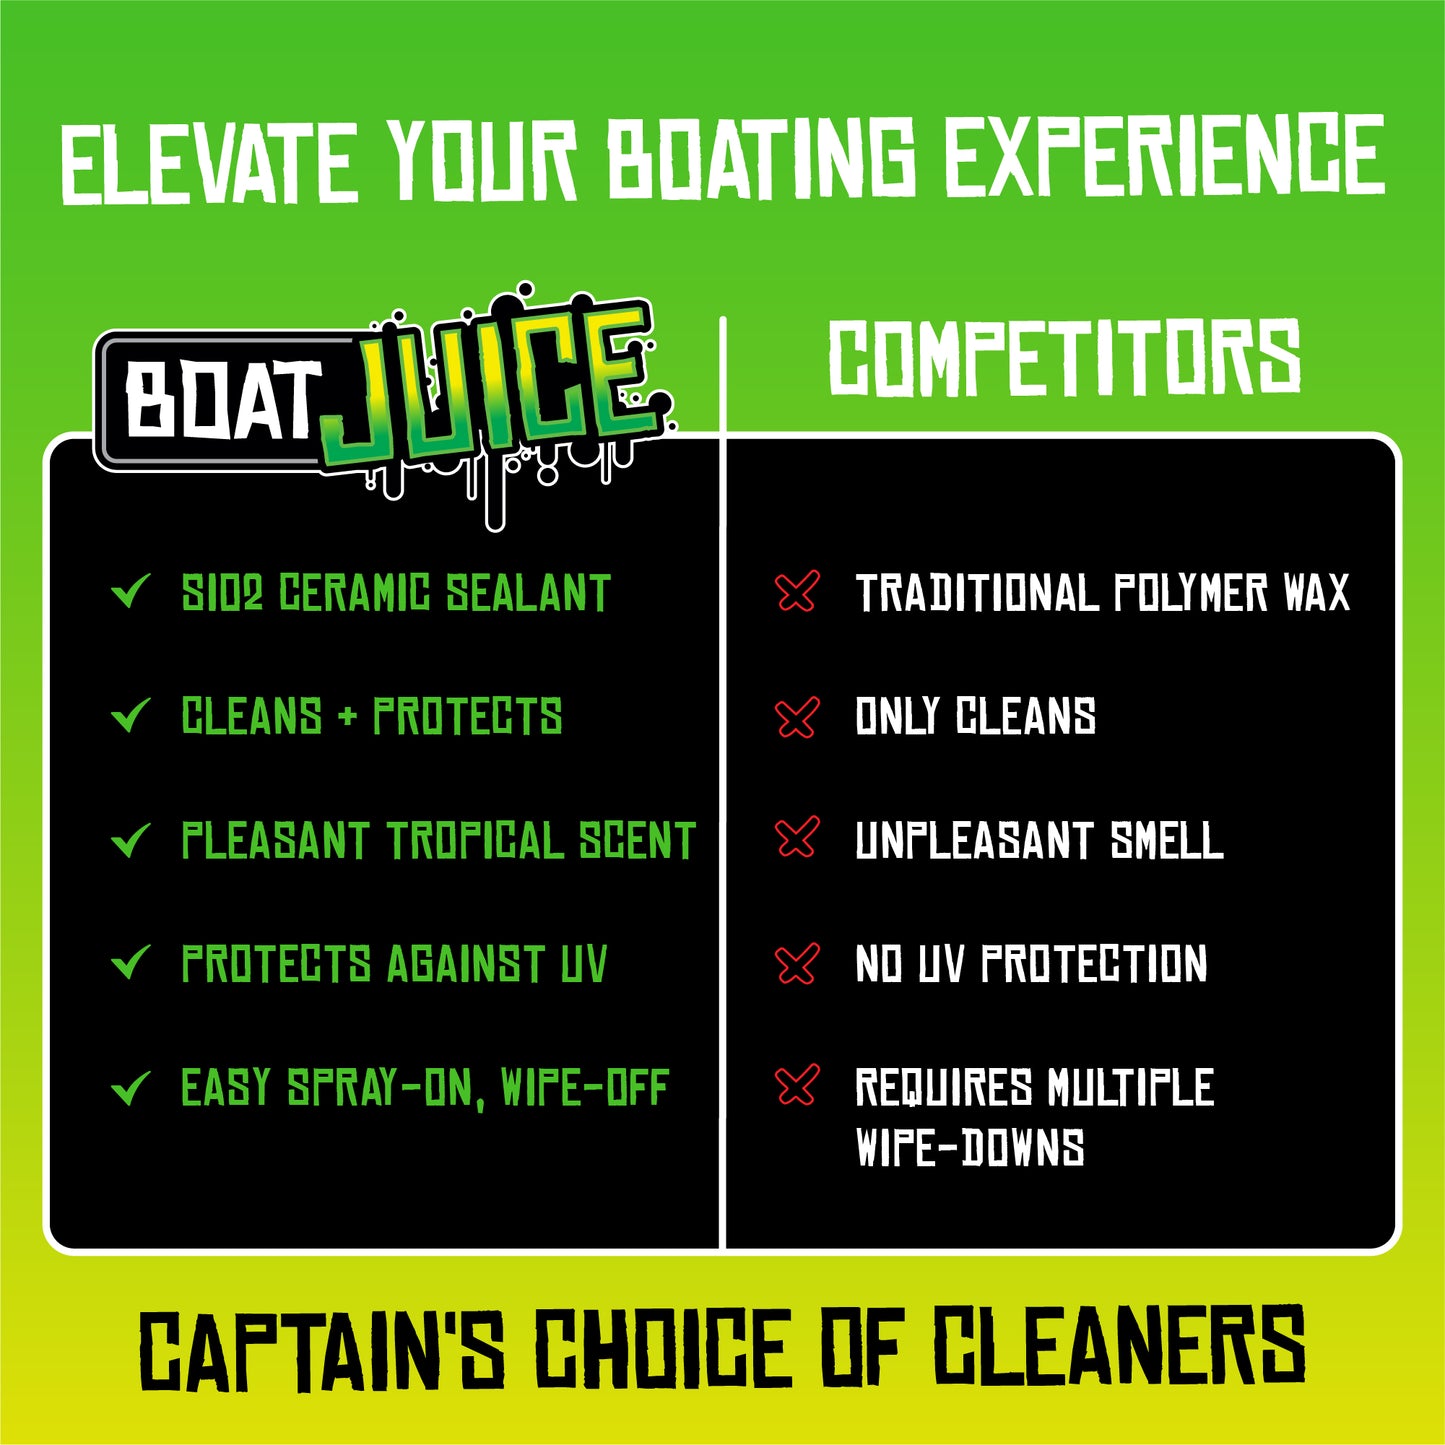 Boat Juice Exterior Cleaner - 1 Gallon